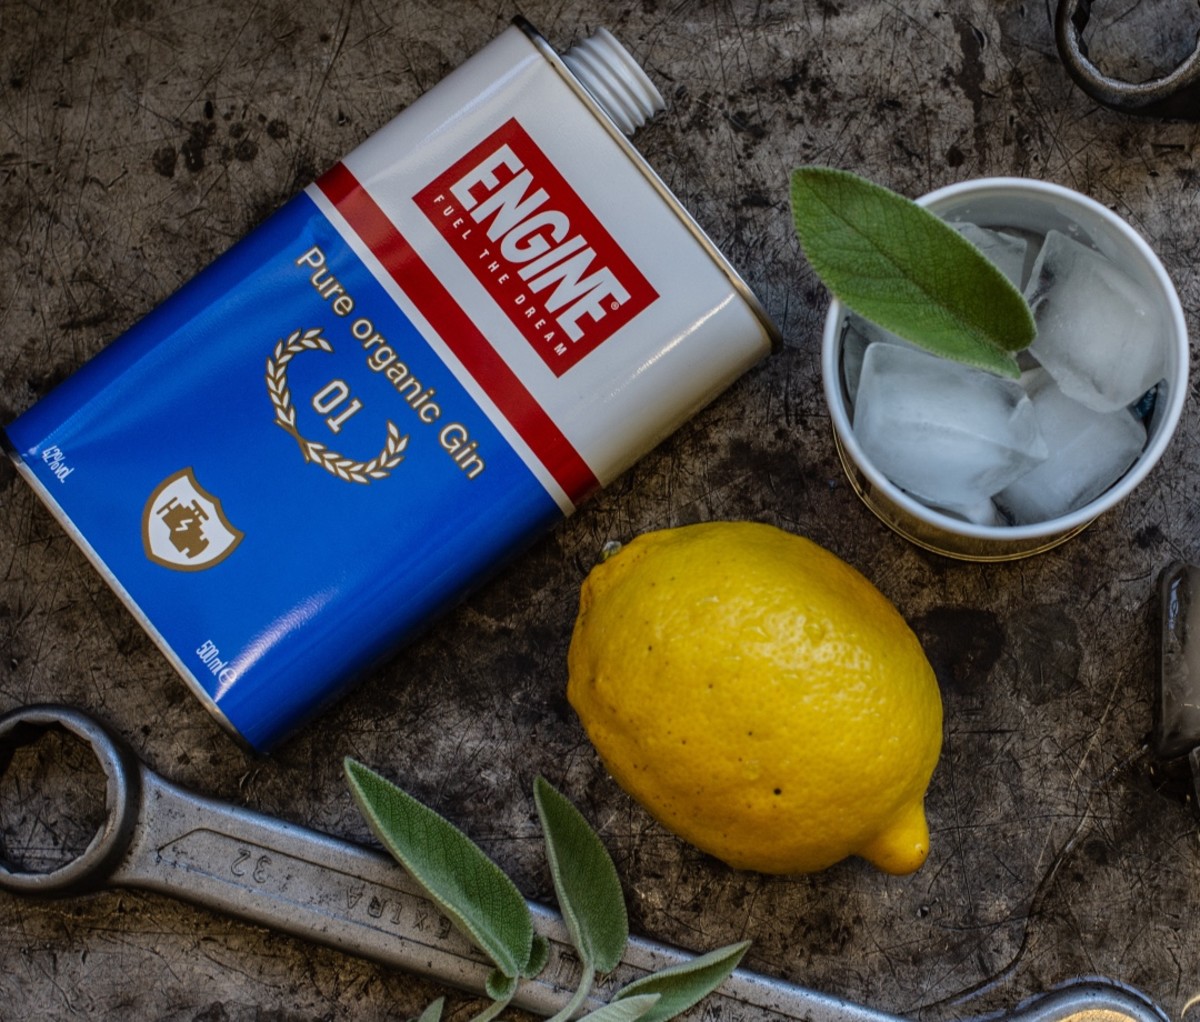 Can of organic Engine gin with lemon and tonic cocktail